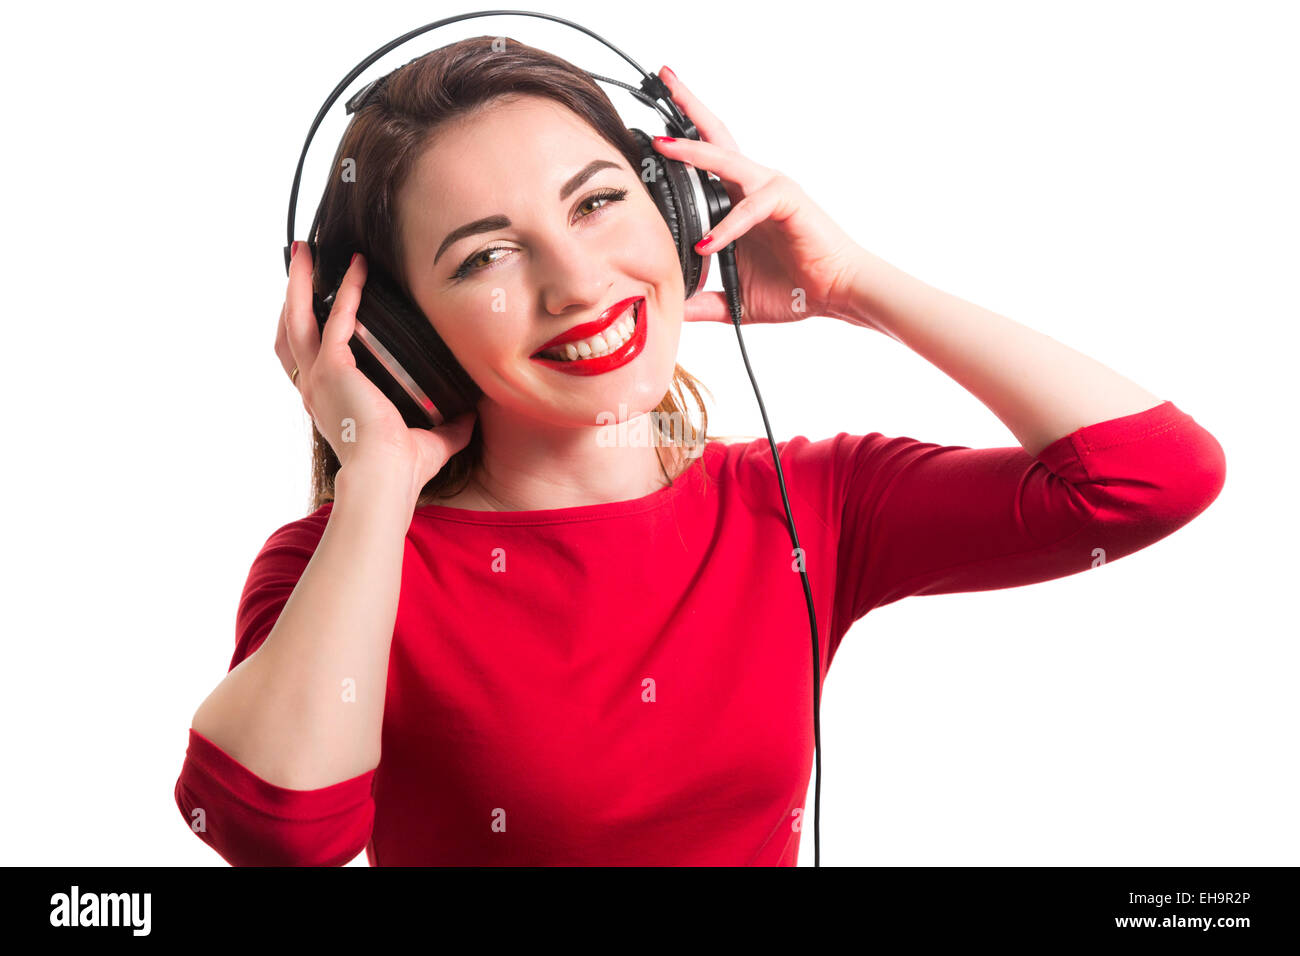 Girl in long-sleeve t-shirt wearing red lipstick touching big headphones listening to music smiling and looking at camera isolat Stock Photo